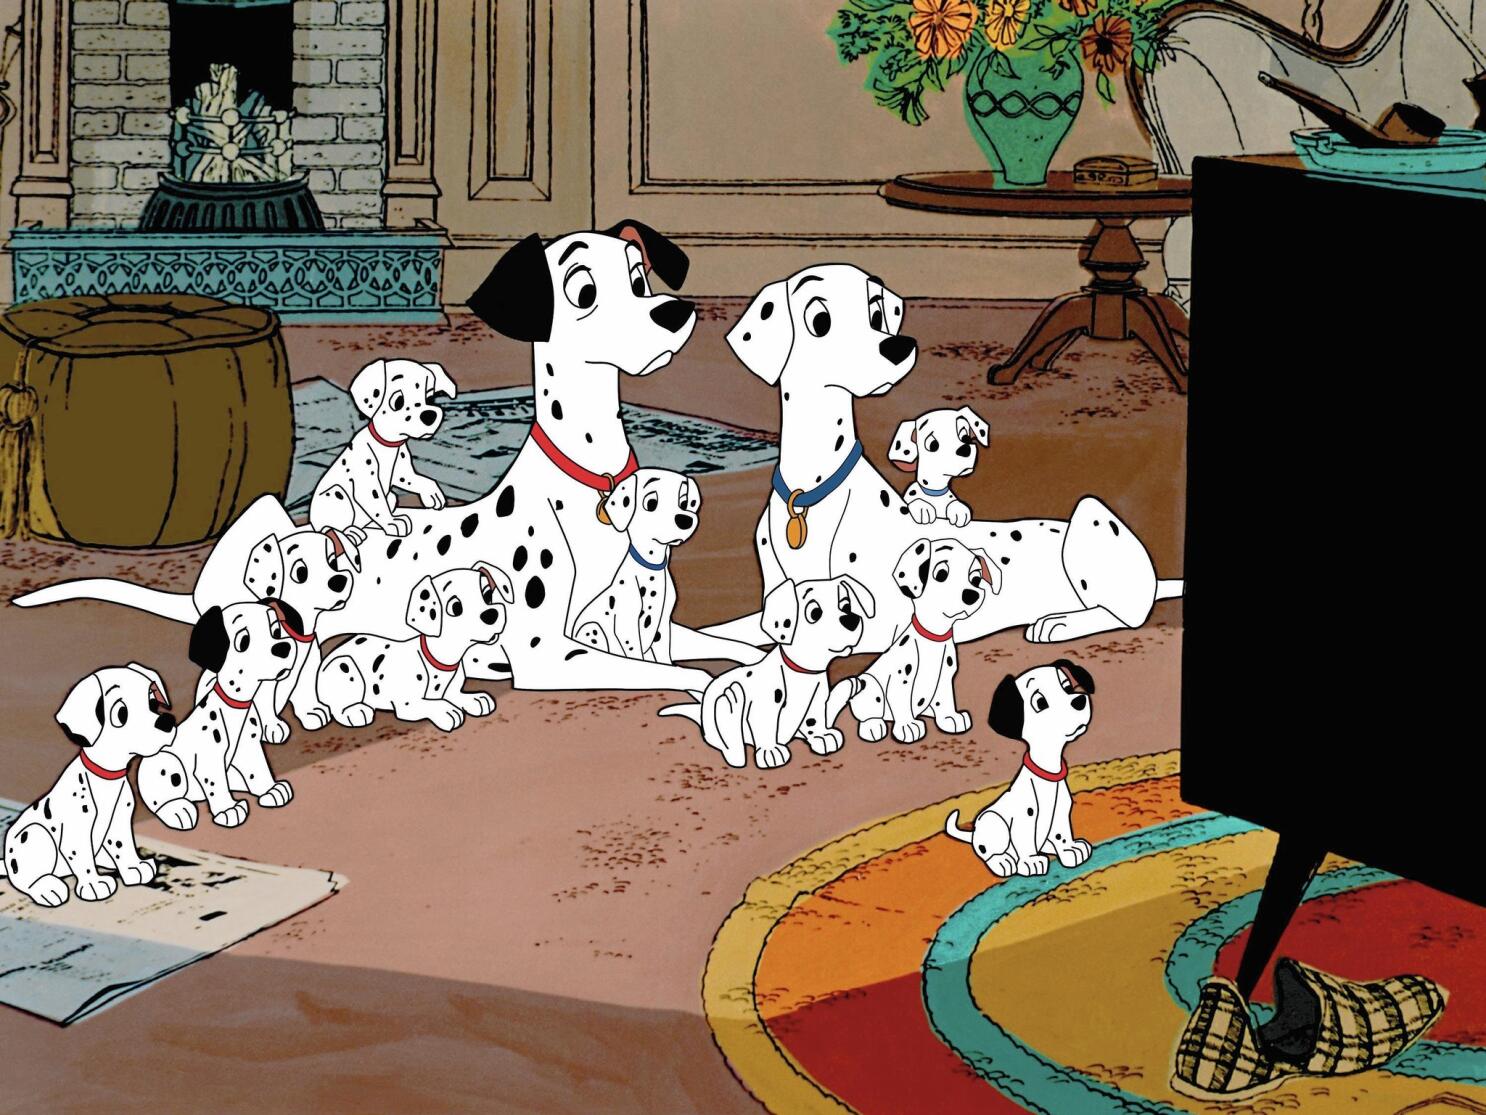 Disney 101 Dalmatians, Book by Editors of Studio Fun International, Official Publisher Page